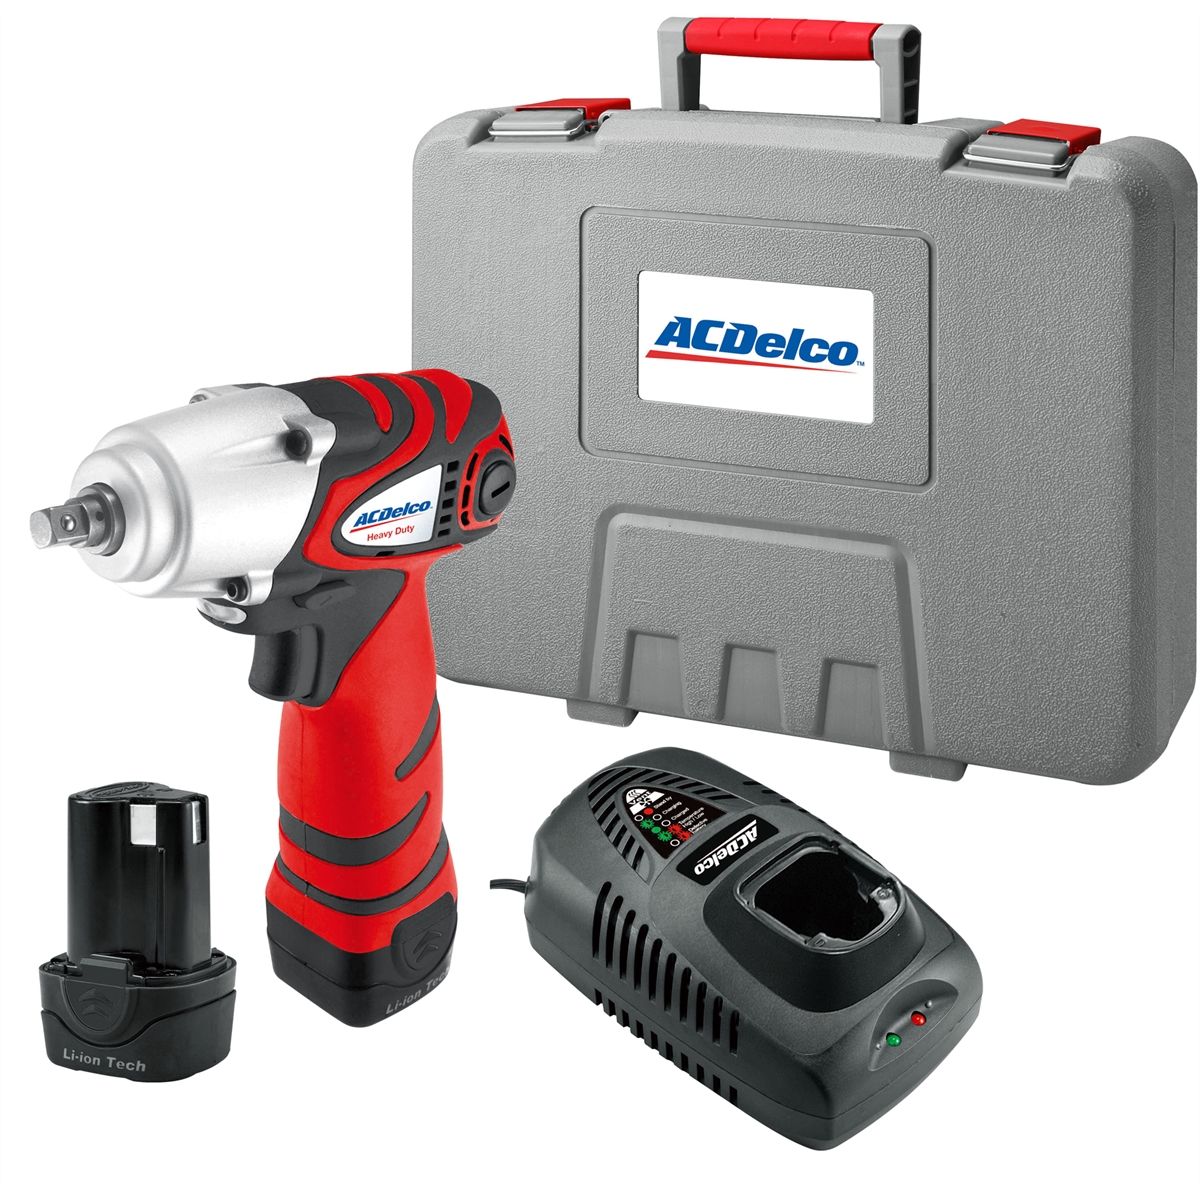 Acdelco Impact Wrench Shop, 55% OFF | www.hcb.cat